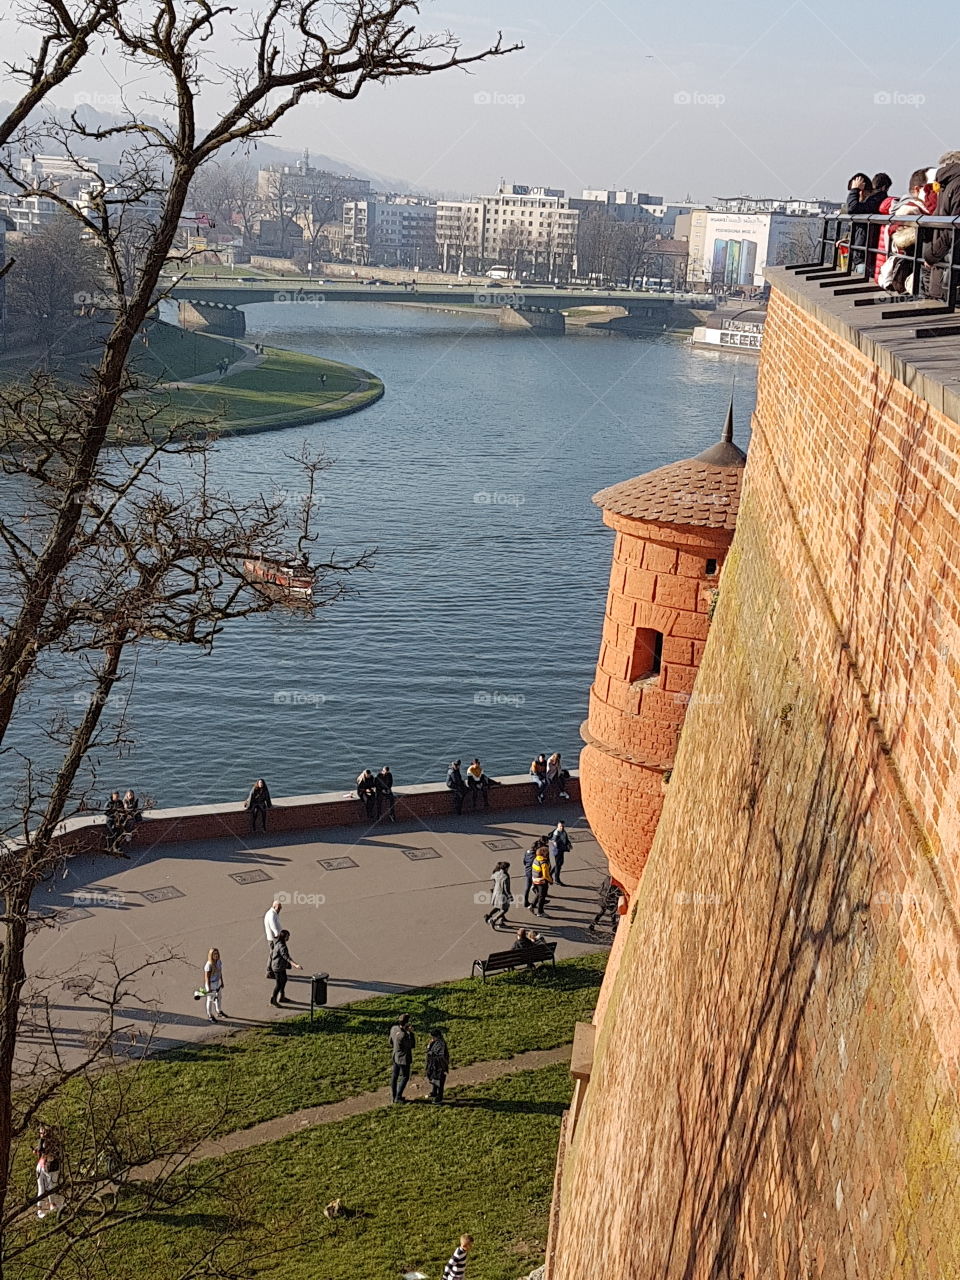 View from the castle in Krakow